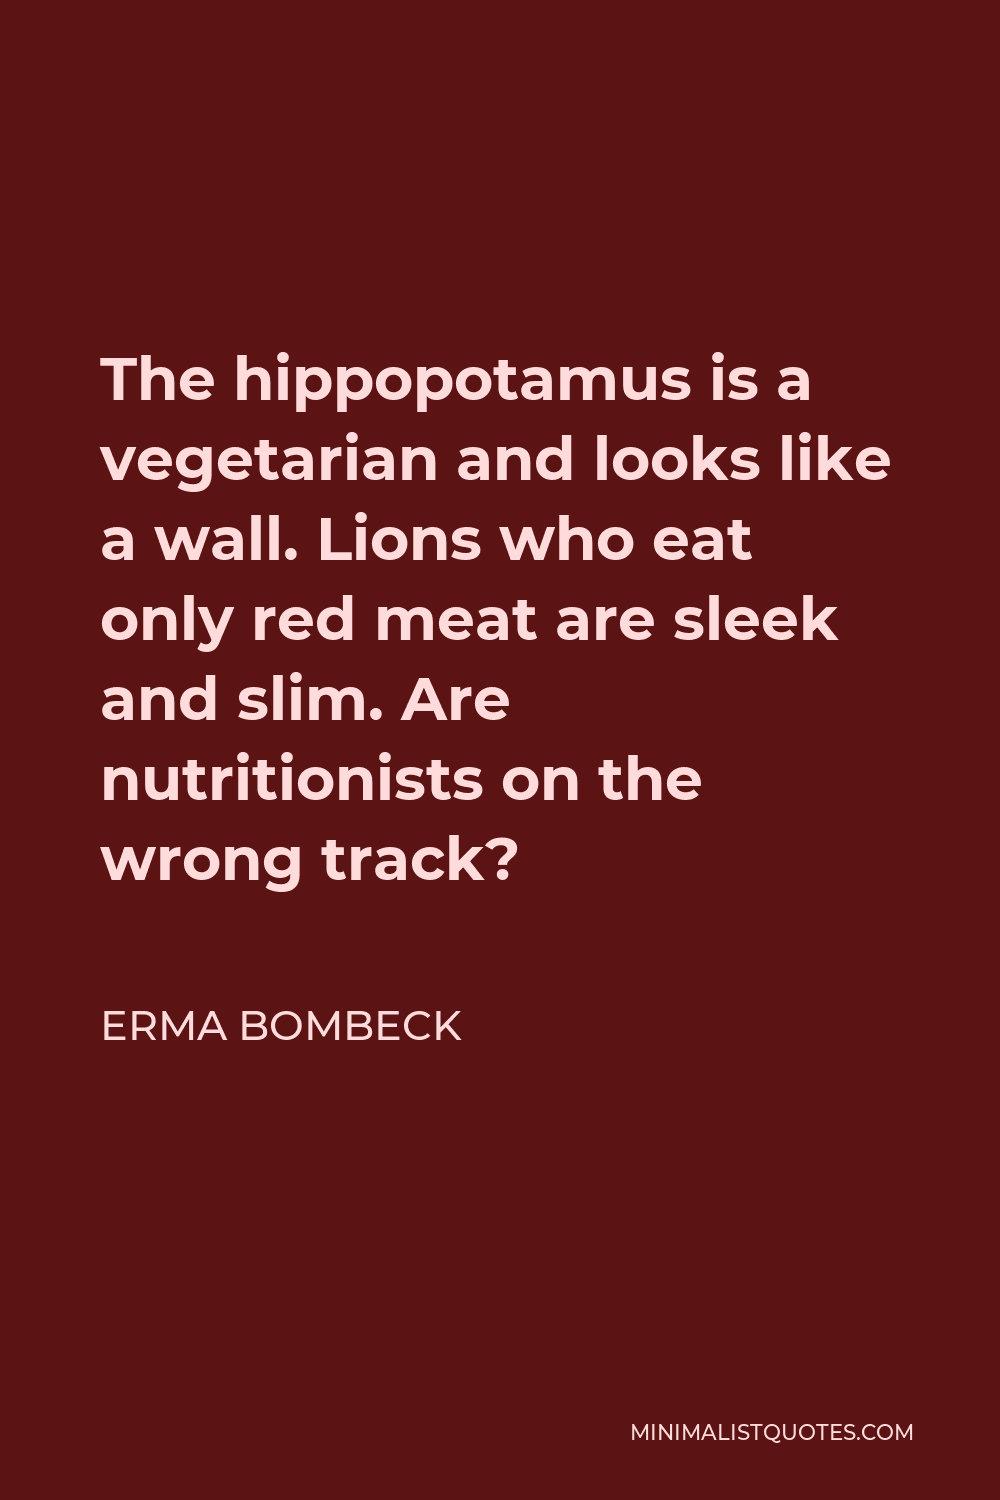 Erma Bombeck Quote - The hippopotamus is a vegetarian and looks like a wall. Lions who eat only red meat are sleek and slim. Are nutritionists on the wrong track?